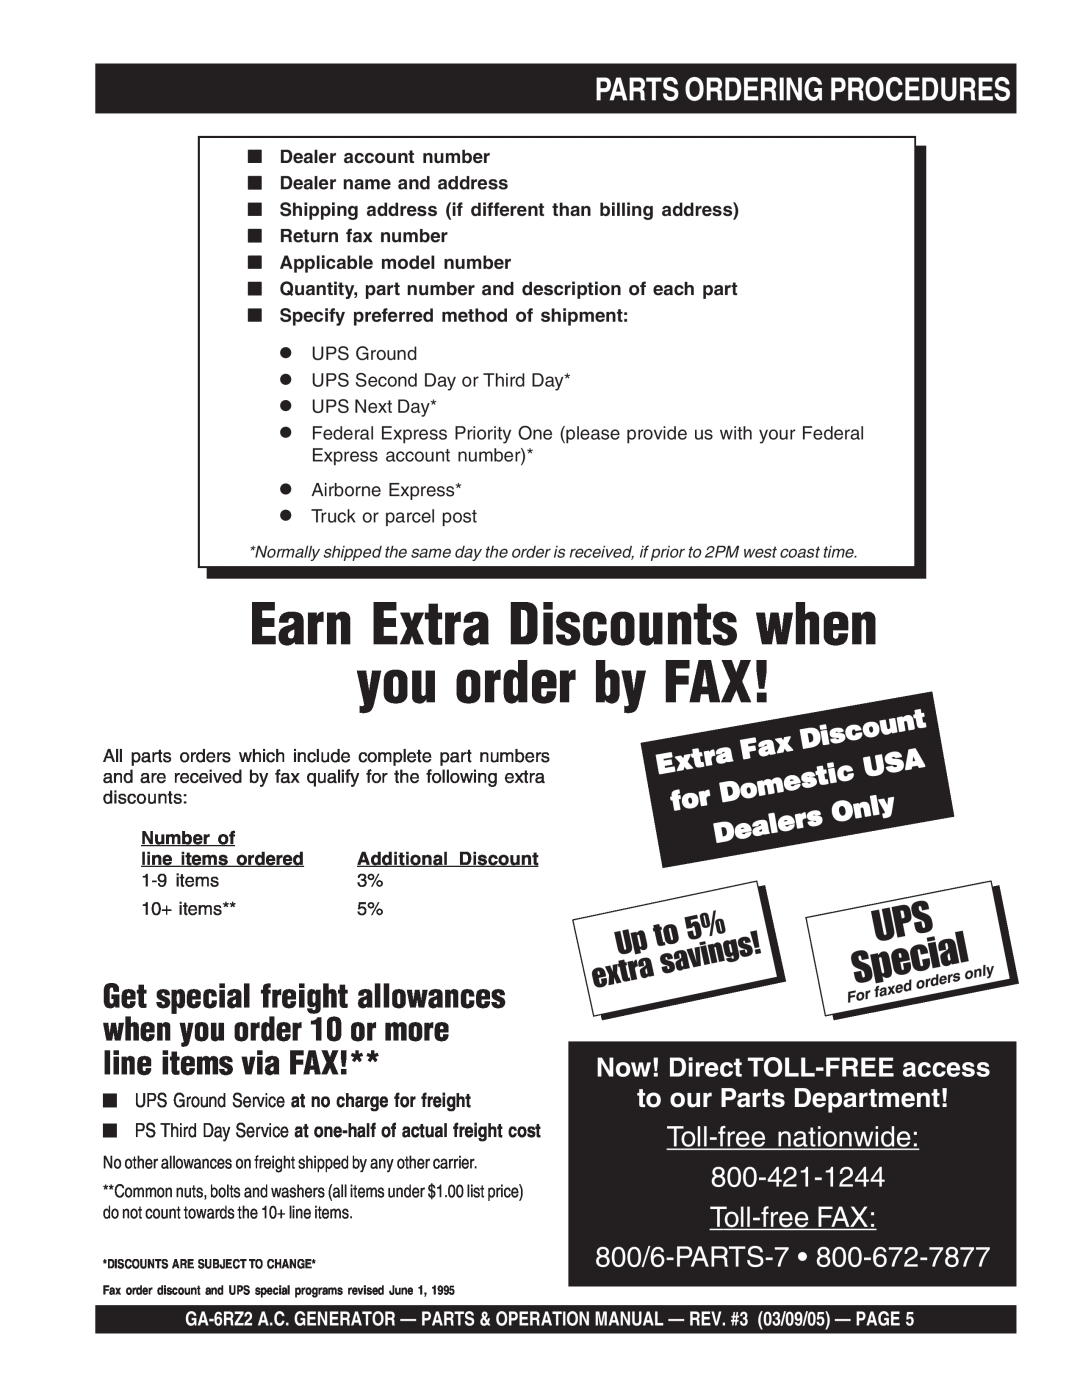 Multiquip GA-6RZ2 Earn Extra Discounts when you order by FAX, Parts Ordering Procedures, Domestic, Dealers, Only 